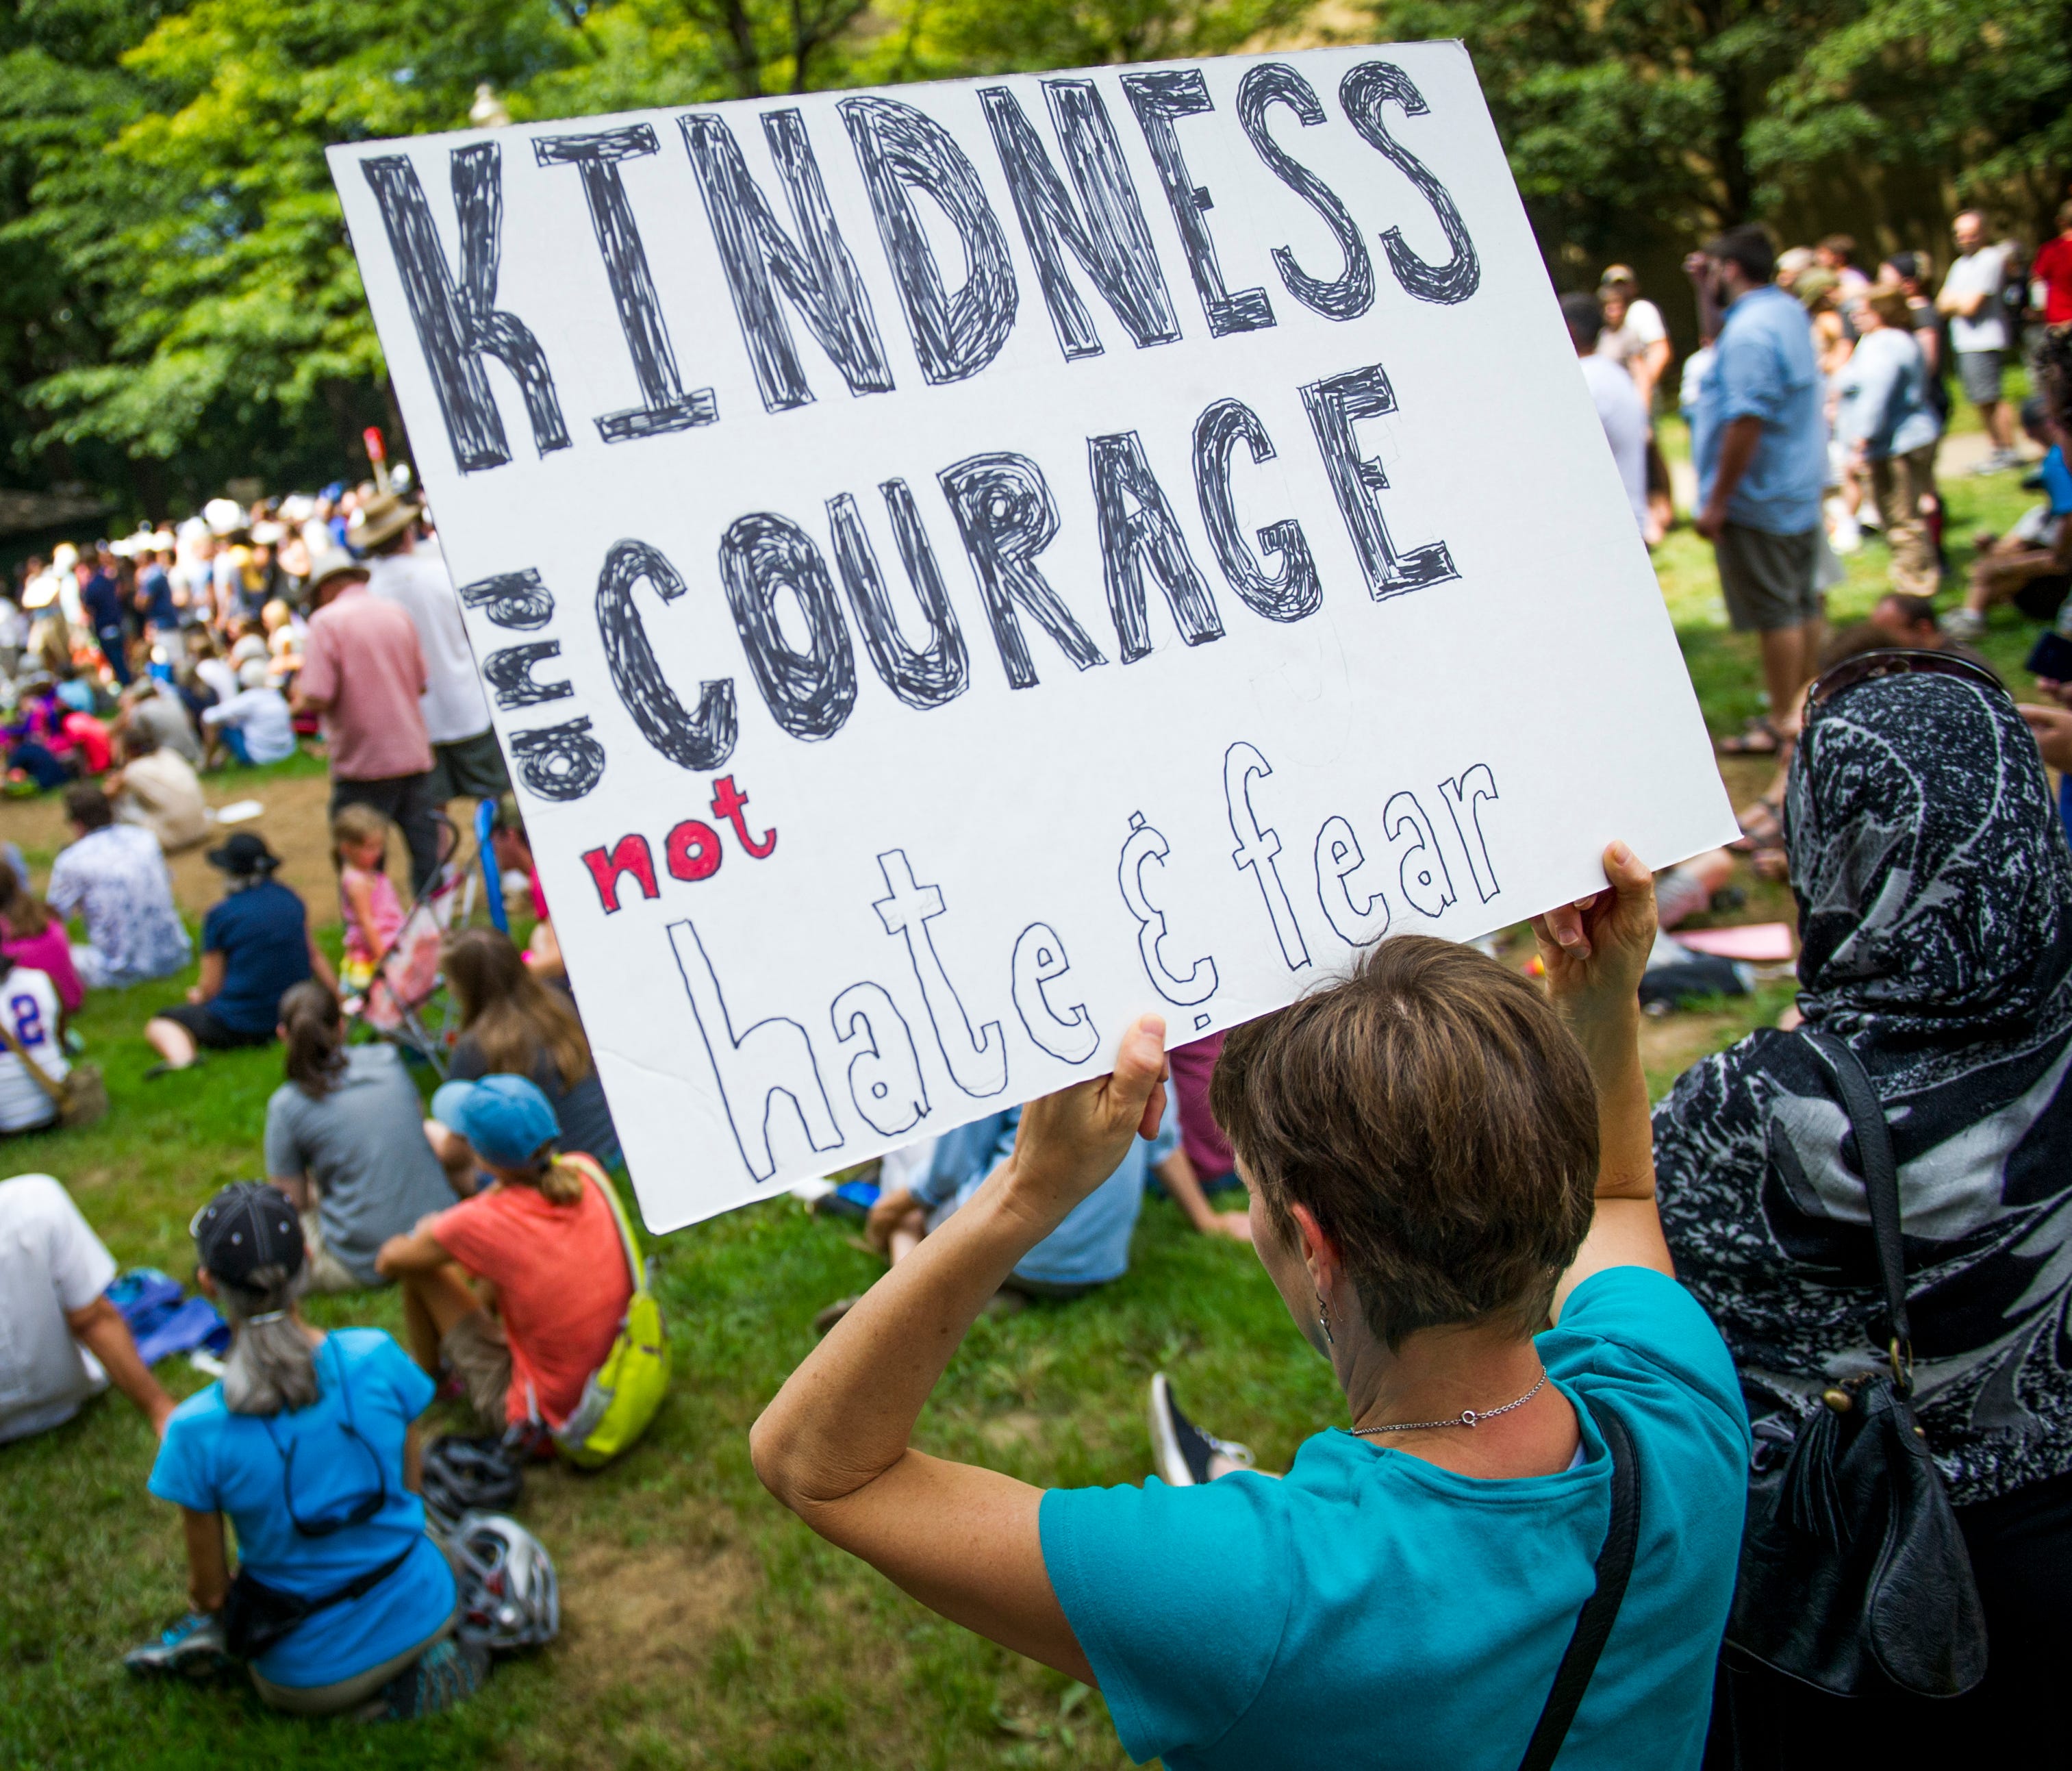 A kindness rally in Knoxville, Tenn., on Aug. 26, 2017.